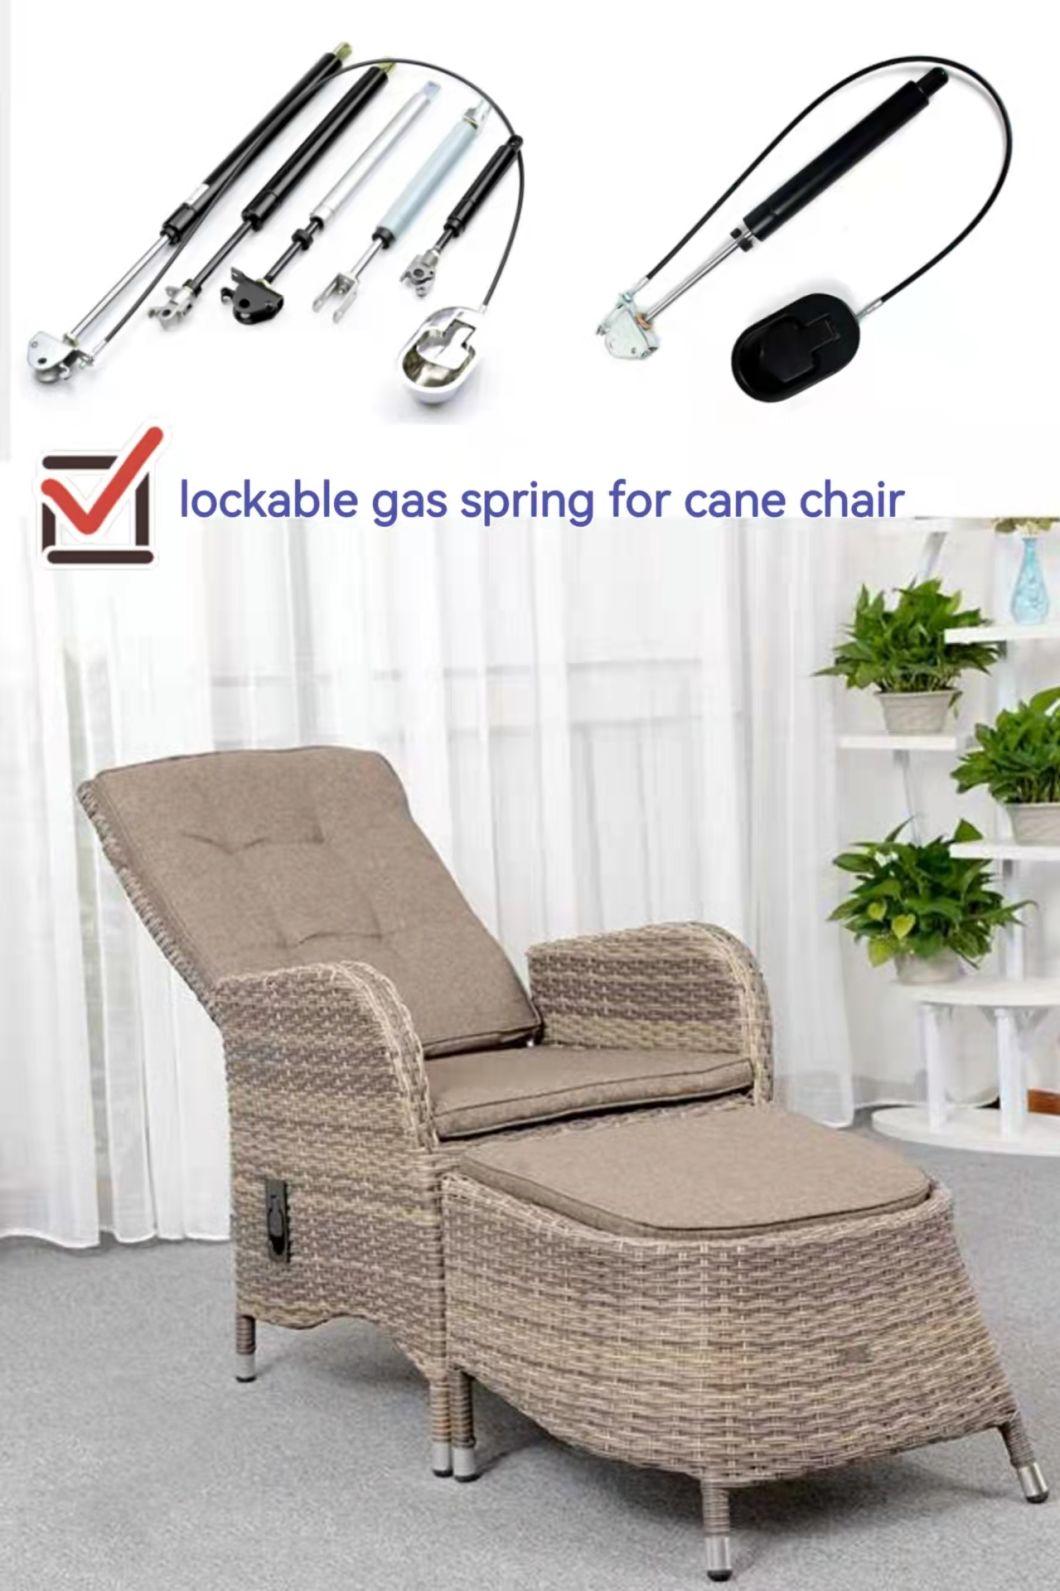 Ruibo Manufacture Sale Furniture Fitting Lockable Air Spring for Cane Chair